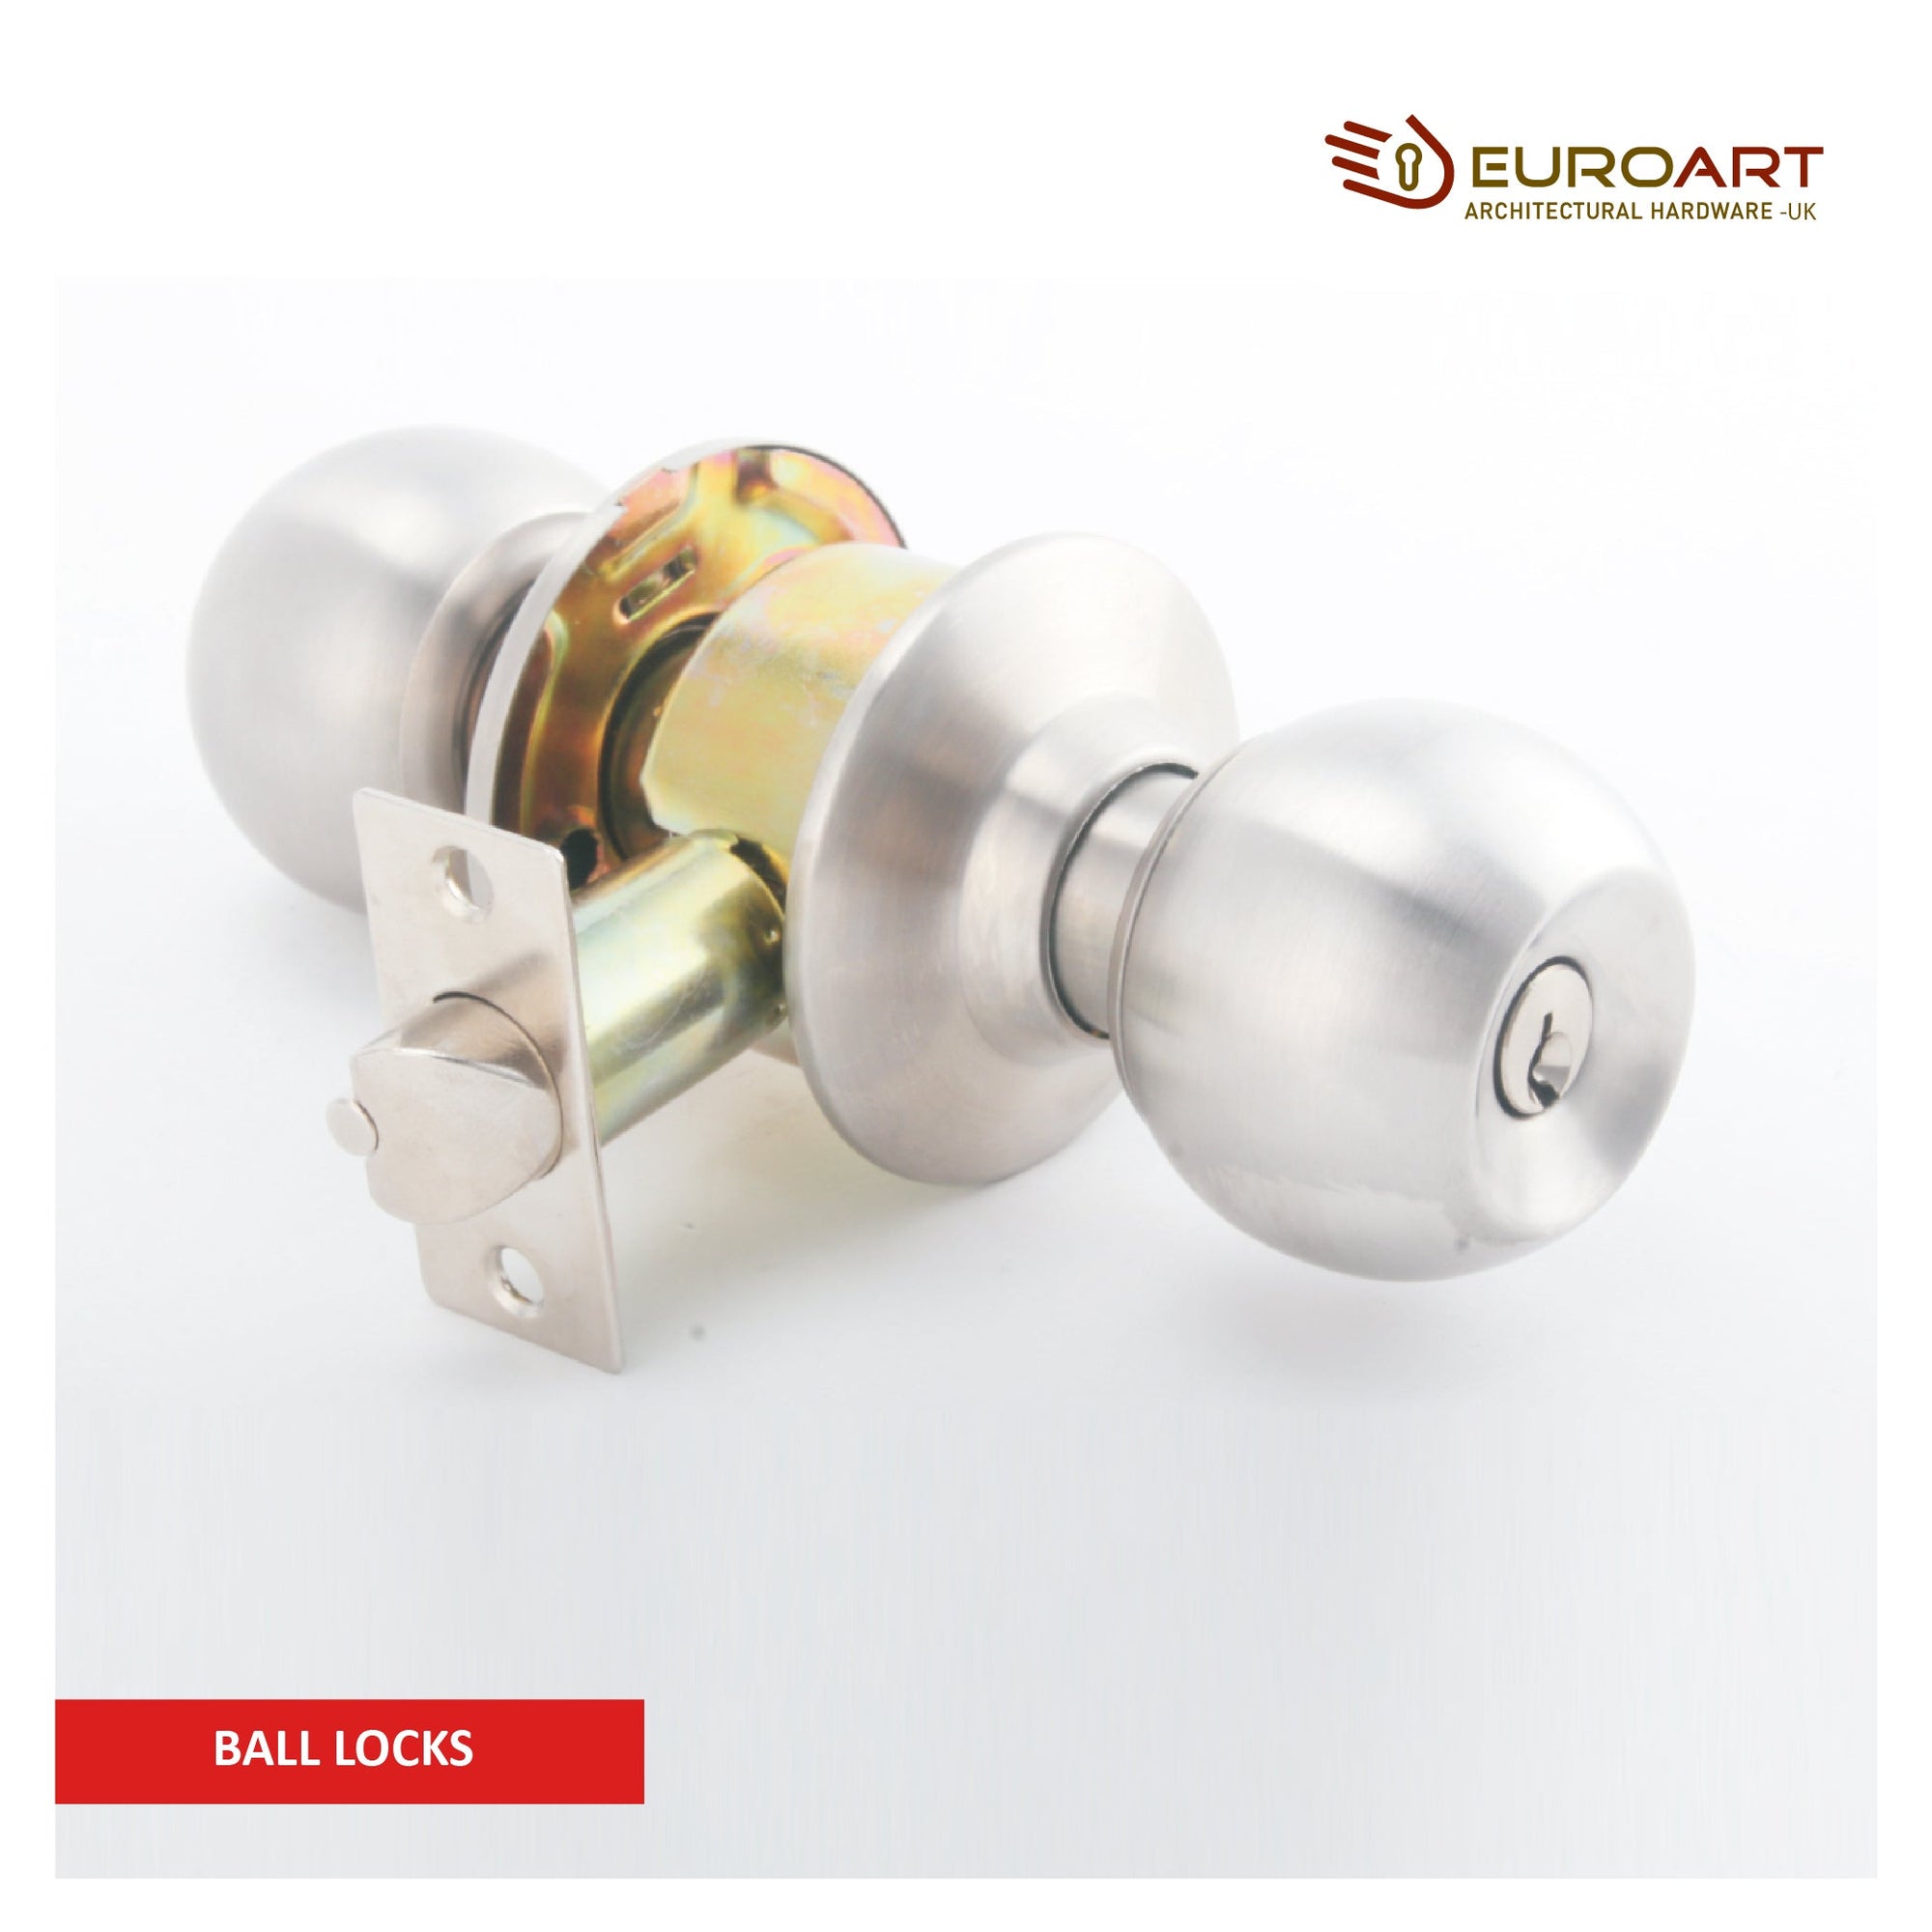 Secure and reliable EuroArt Ball Locks by M. M. Noorbhoy & Co - High-quality locking solutions for peace of mind.